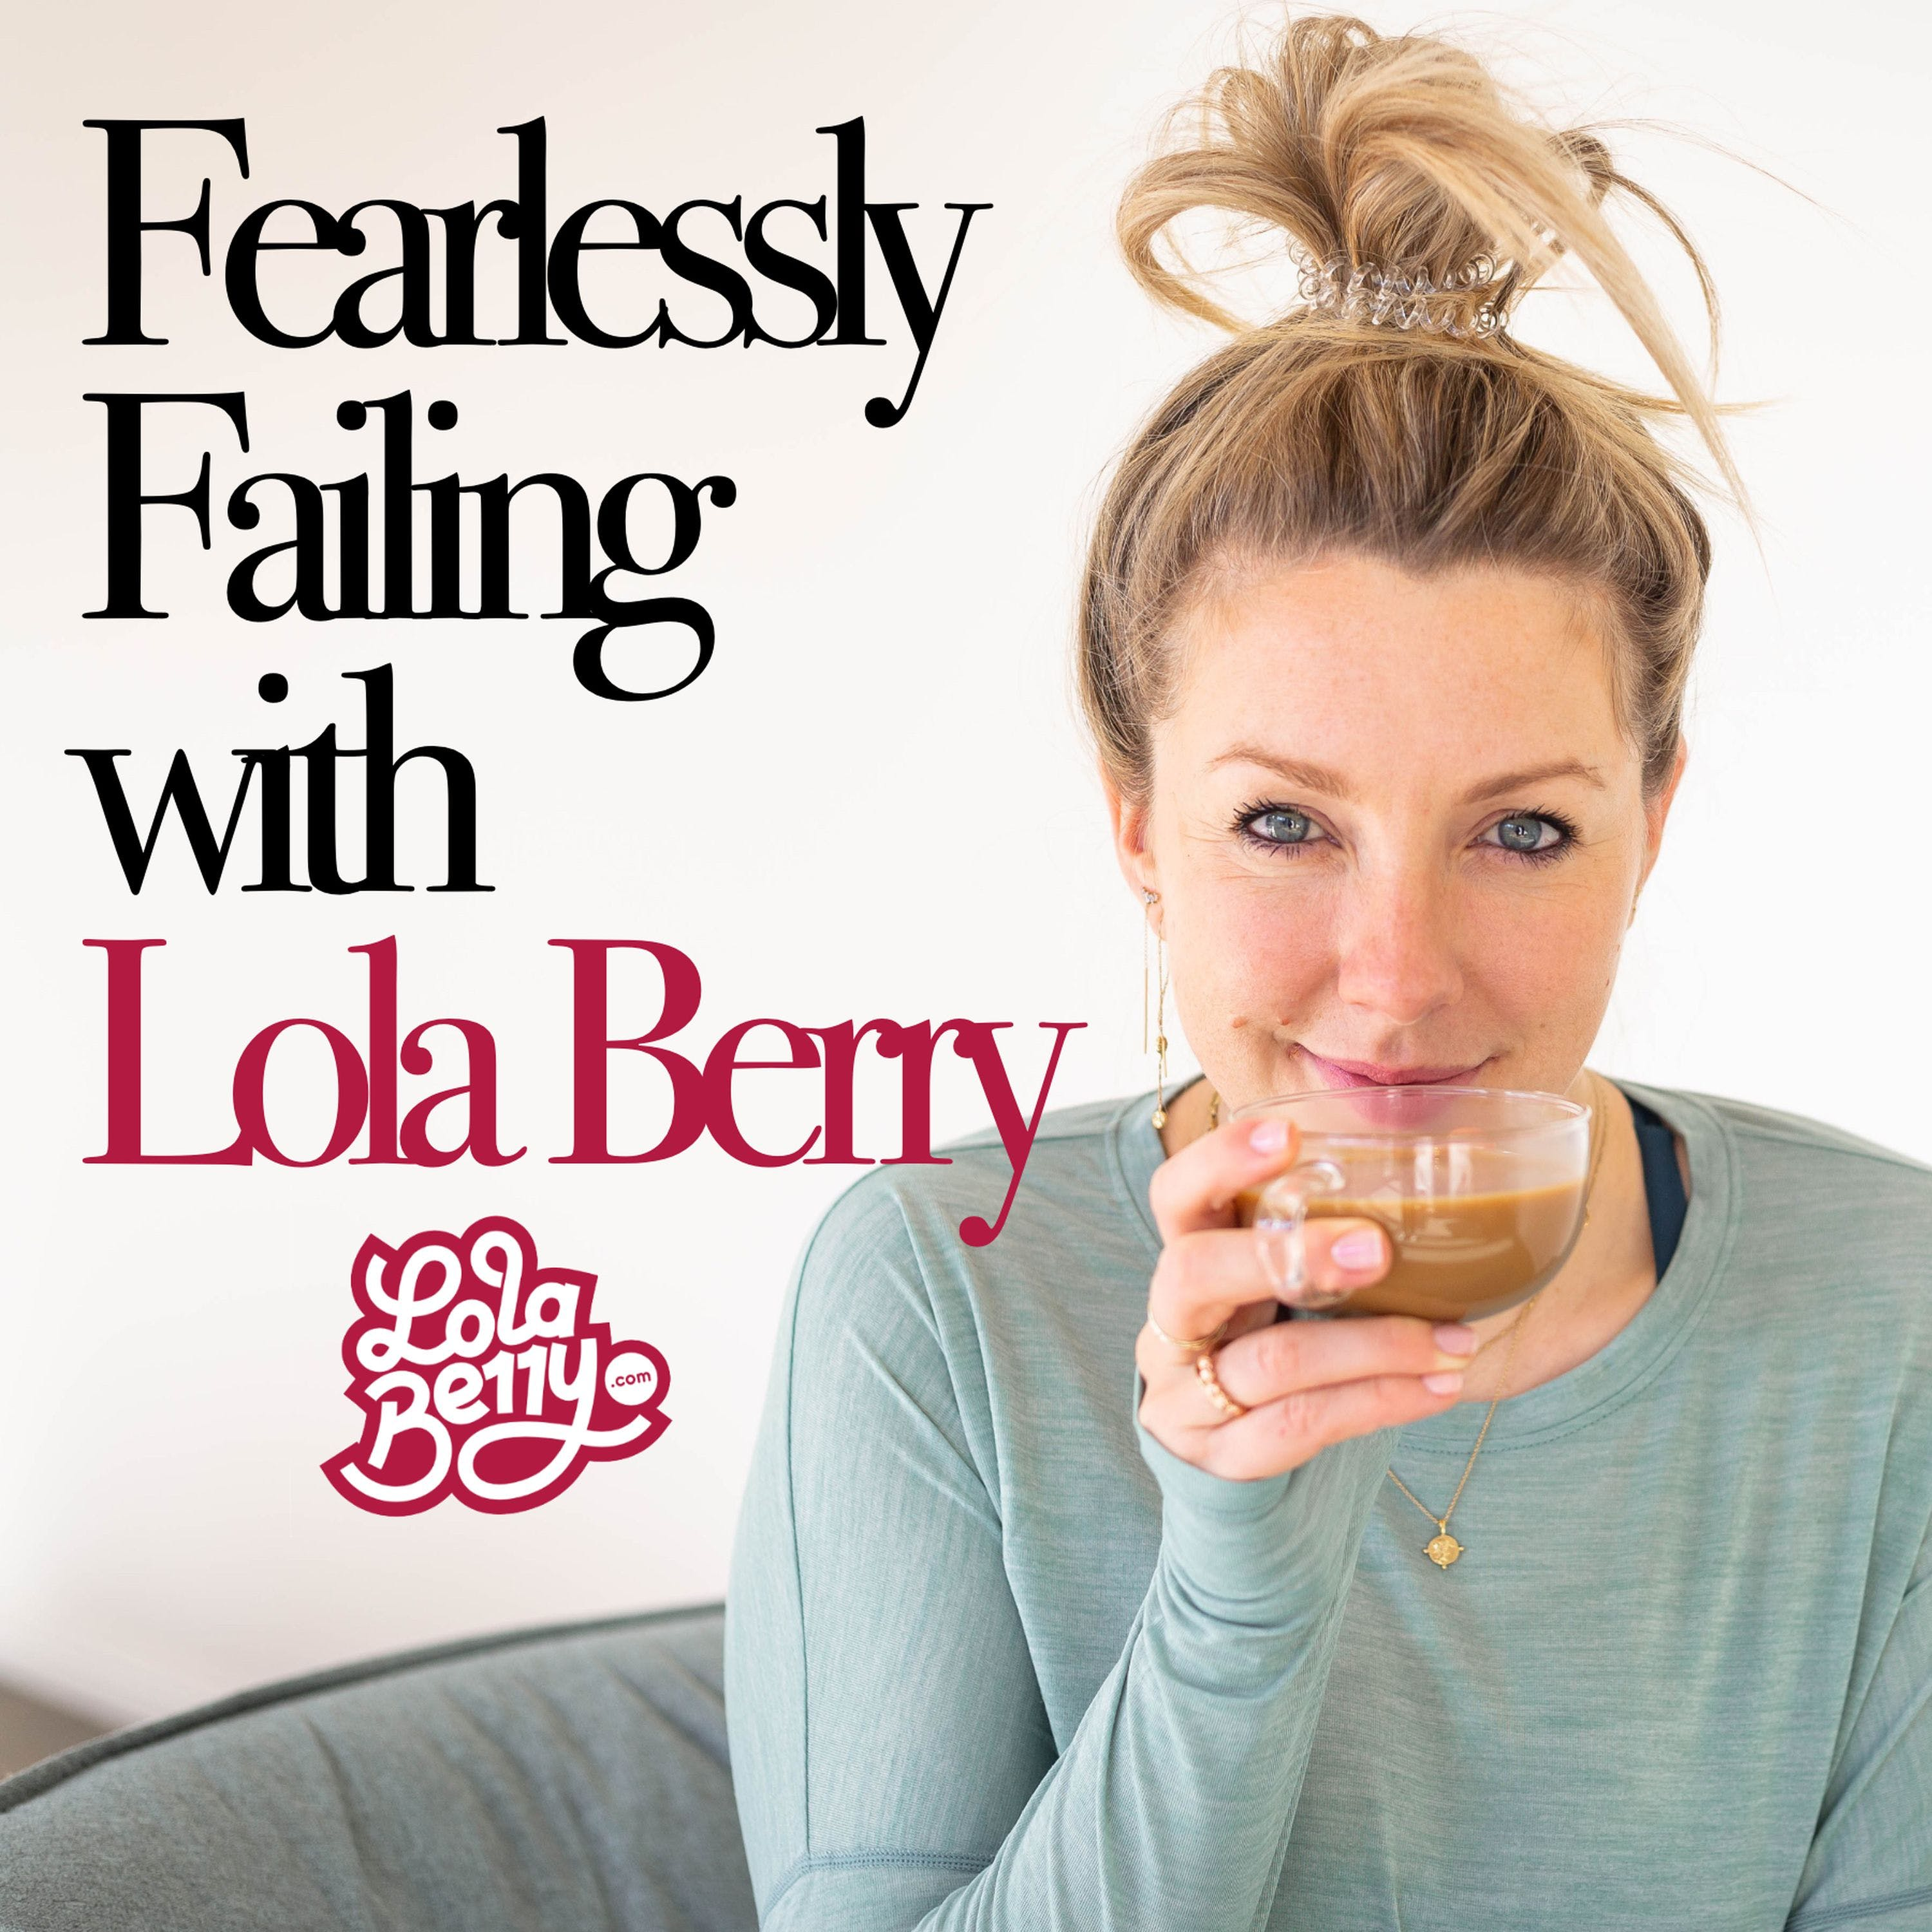 24. Fearlessly Failing: TULLY LOU LIVE